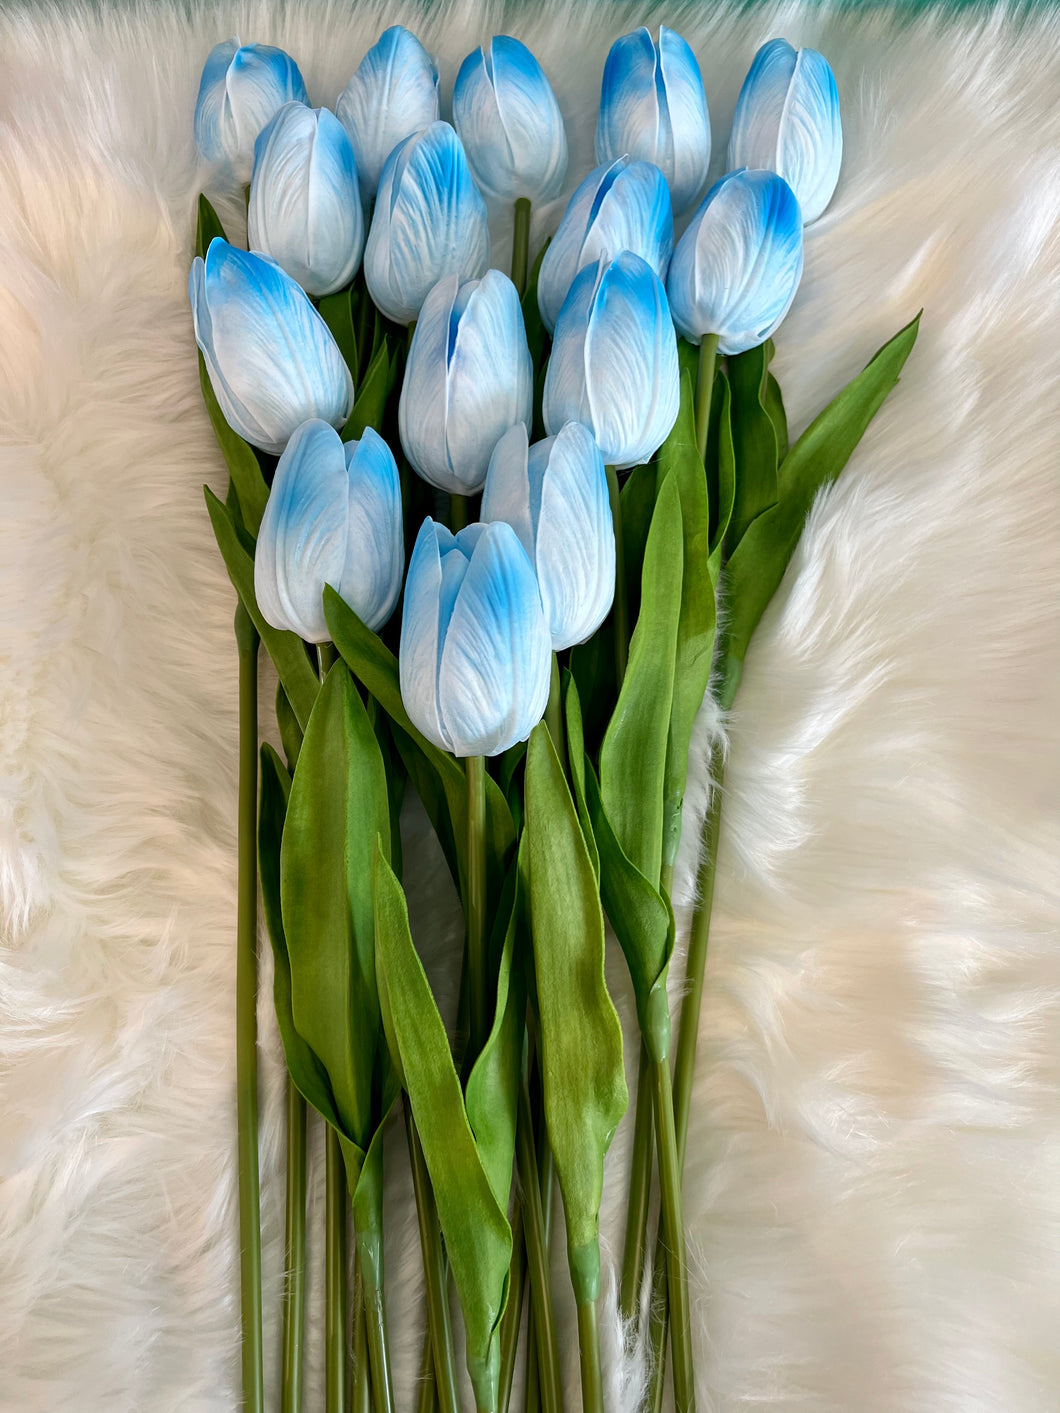 Tulip Flower Artificial Real Touch With Stem Made From Premium PU Leather in Light Blue Color